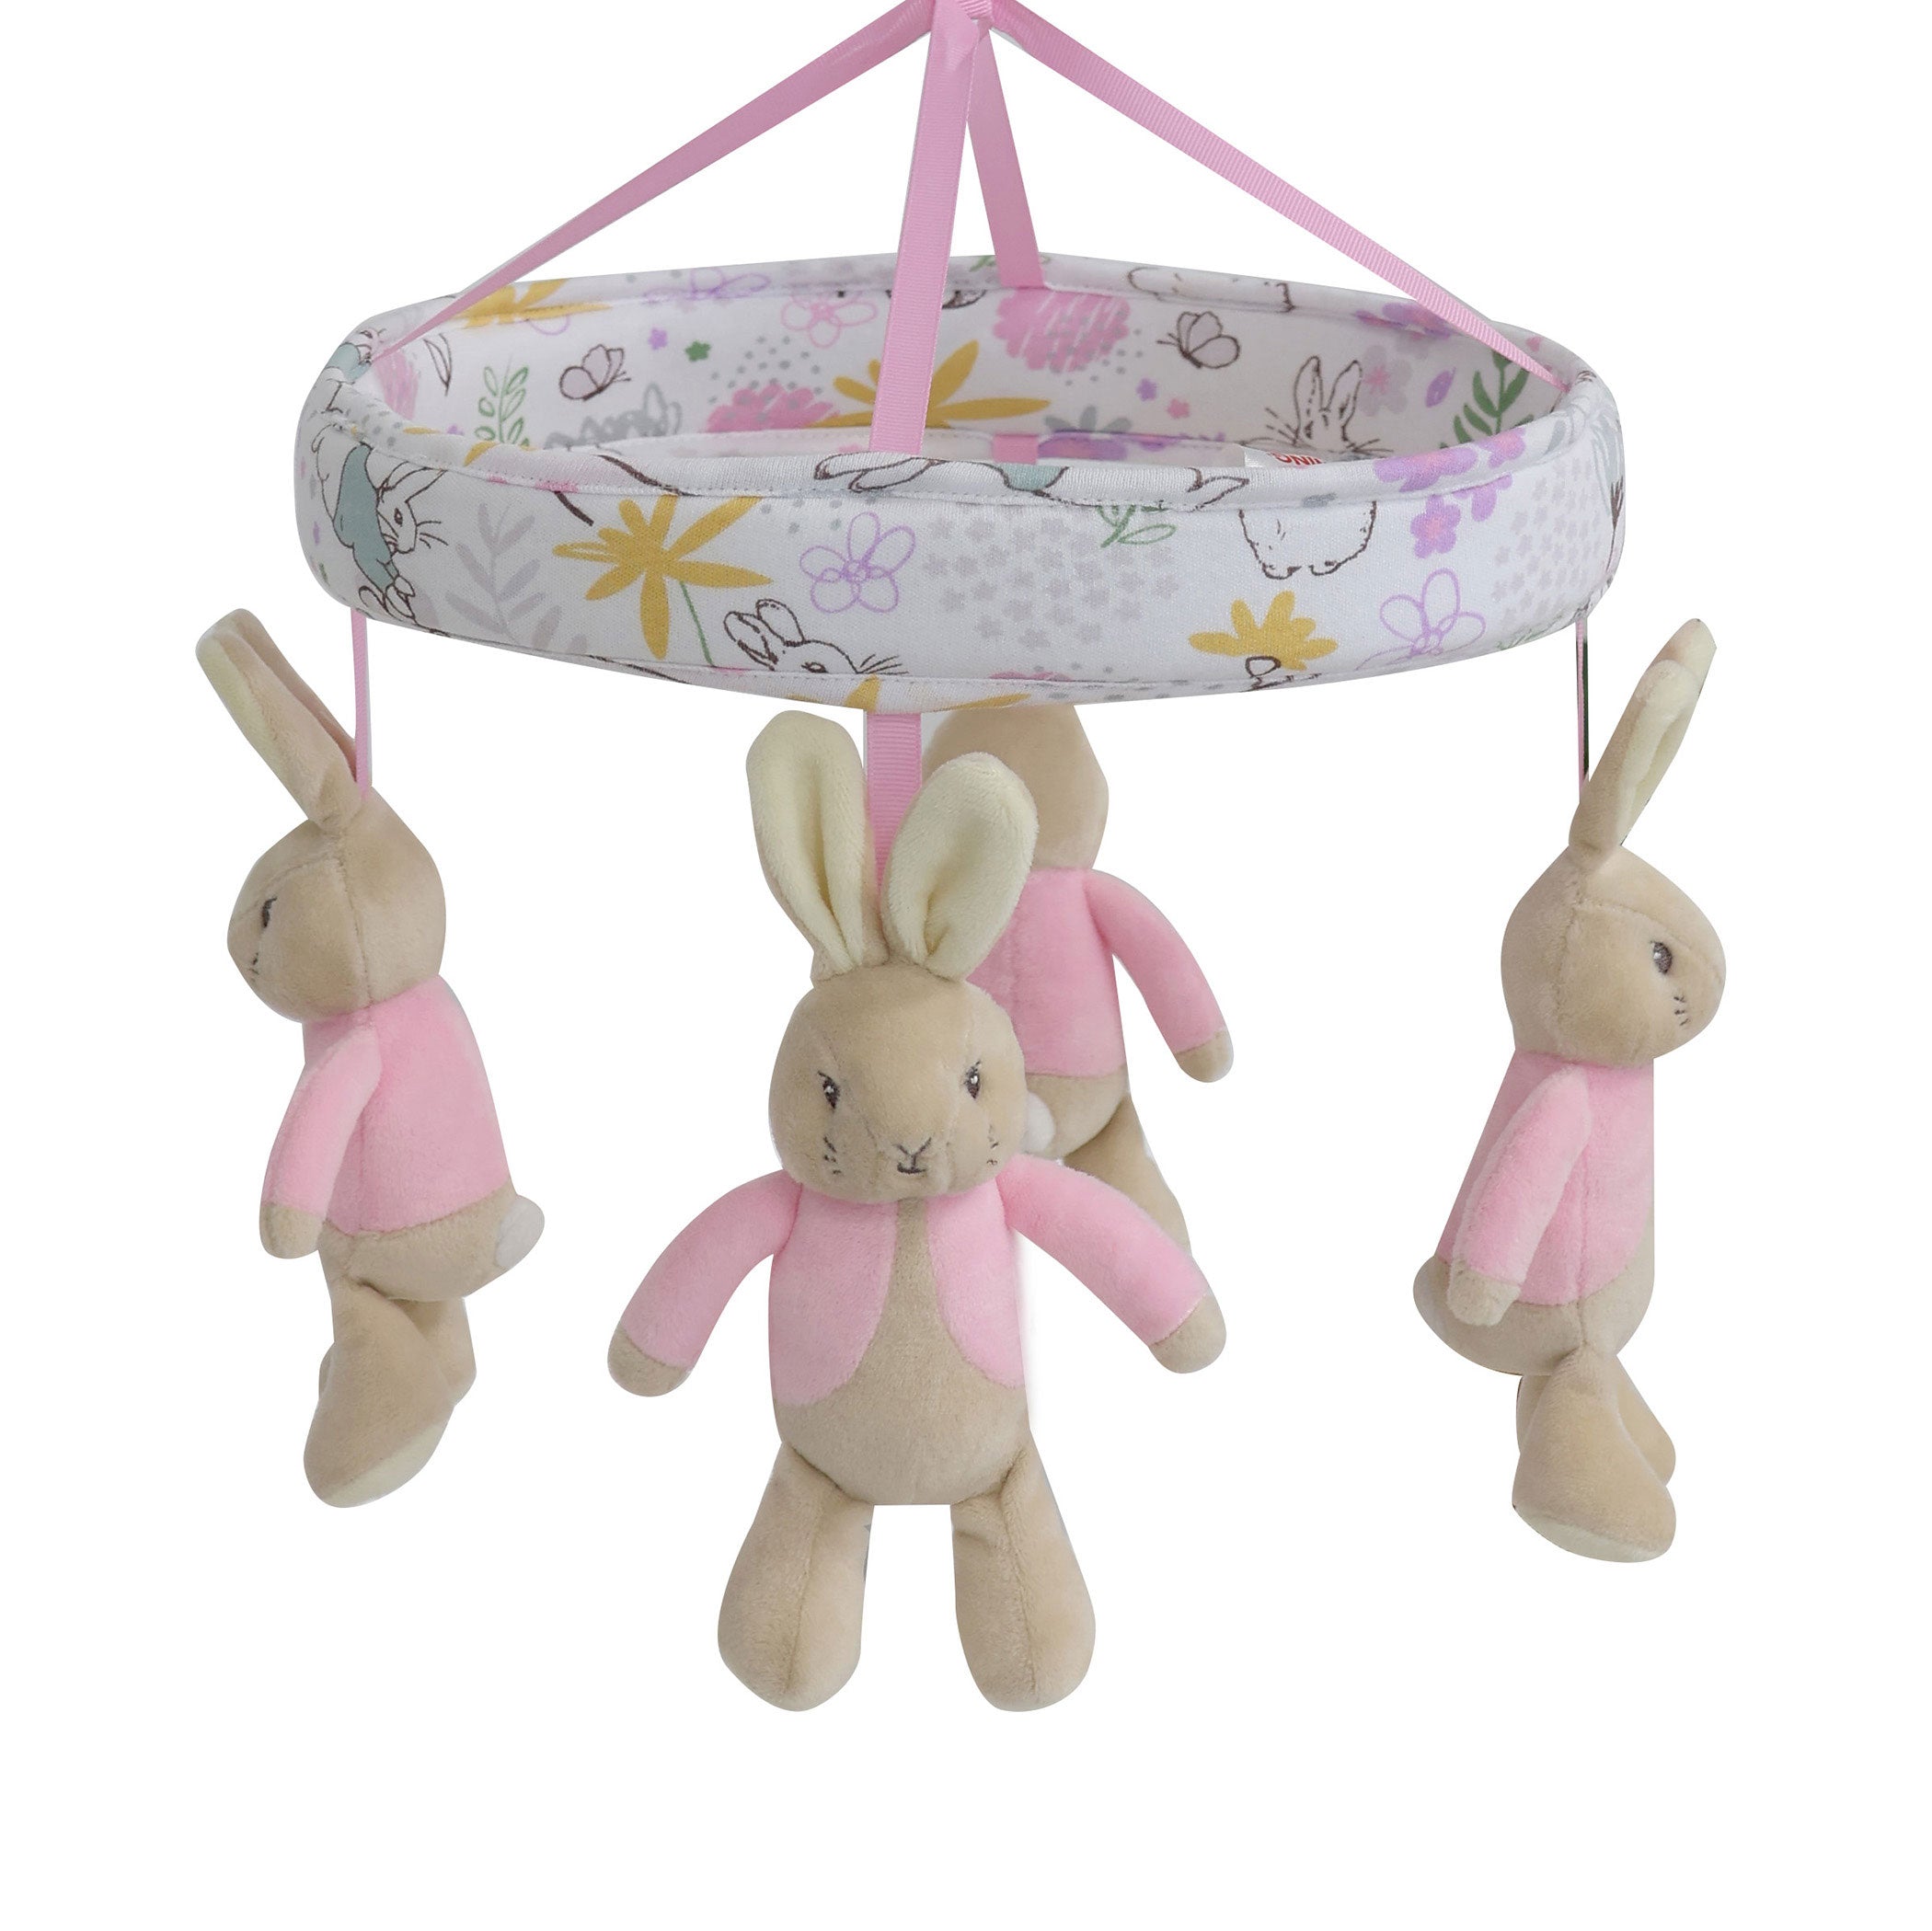 Peter Rabbit 'New Adventure' Bundle (Pink) - Musical Mobile, Hooded Towel, Face Washer, Layette Set, Jersey Wrap, Blanket